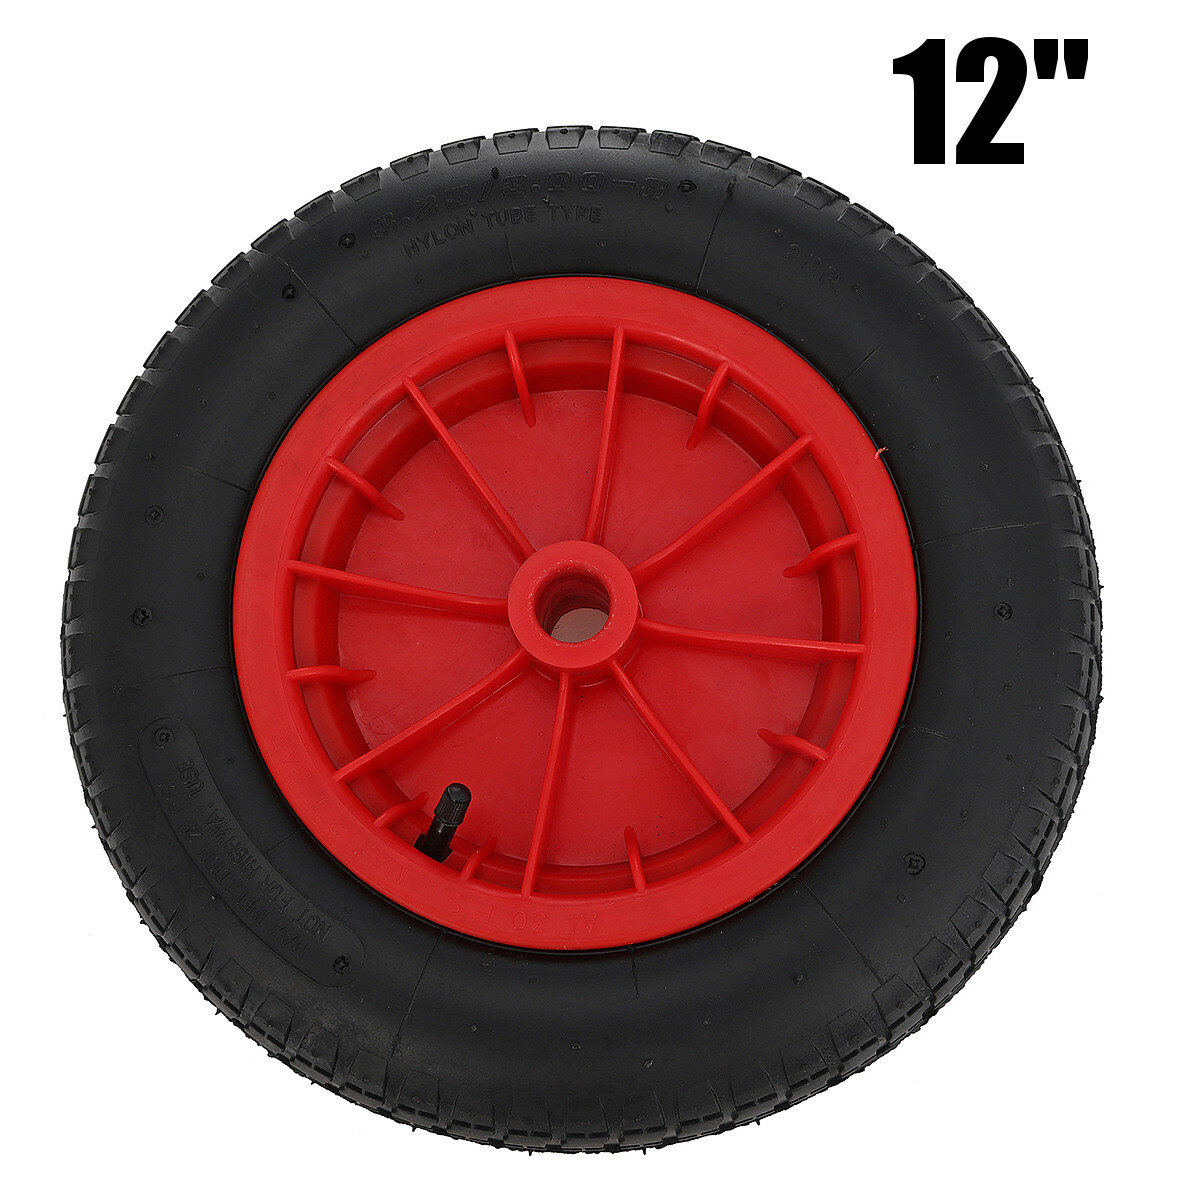 12 Inch Pneumatic Inflatable Tyre Trolley Barrow Cart Tires Wheelbarrow Wheel Replacement Part